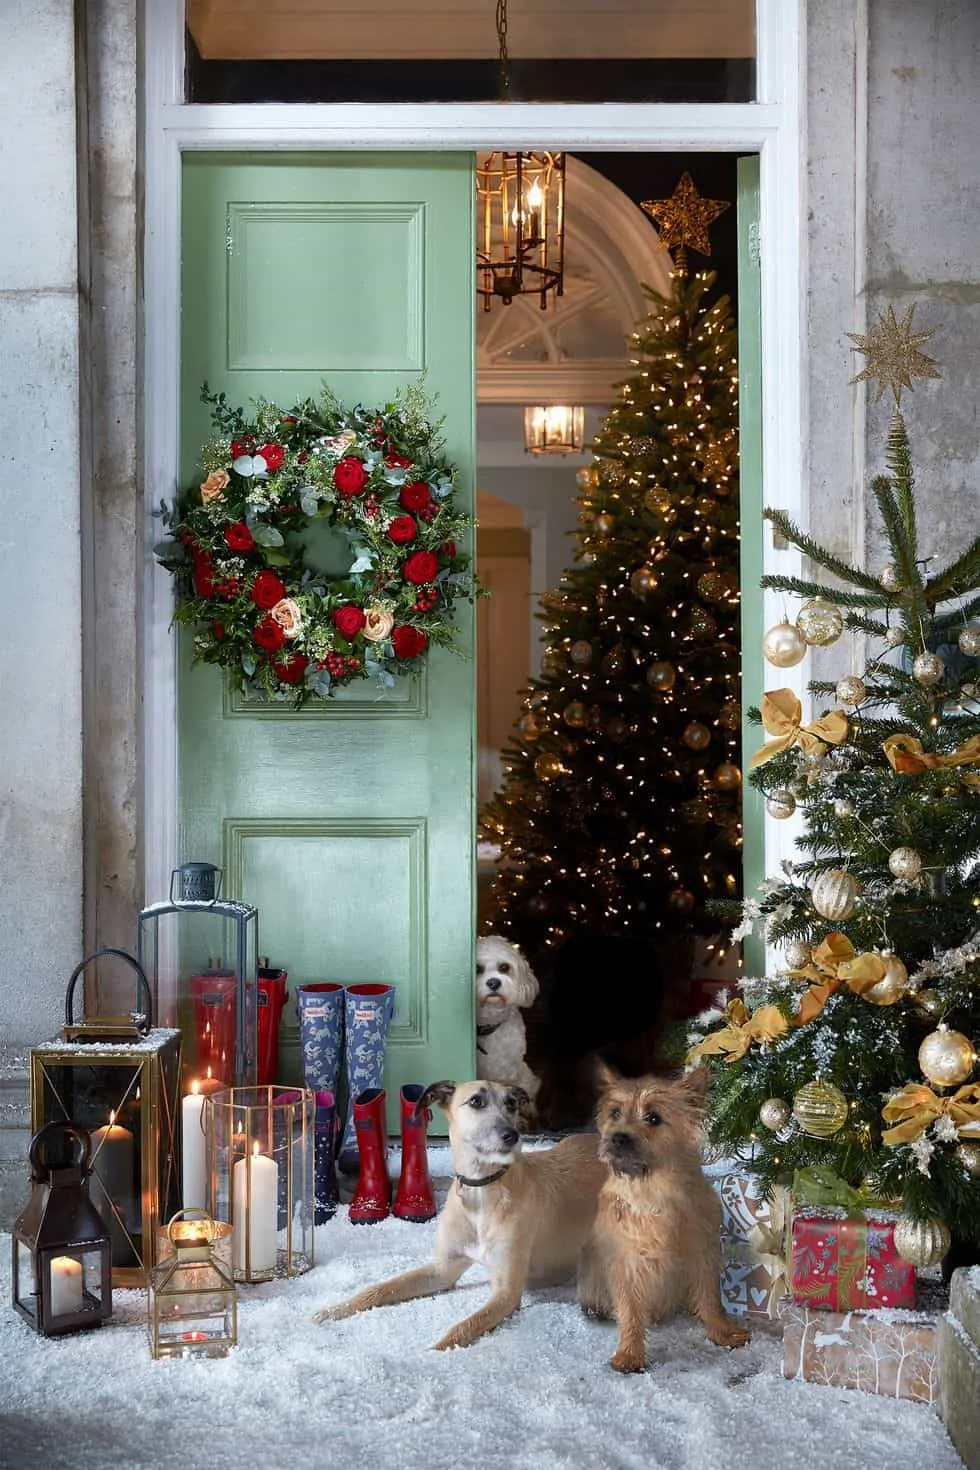 30+ Christmas Garden Ideas to Bring the Festive Spirit to Your Yard | Which to buy?